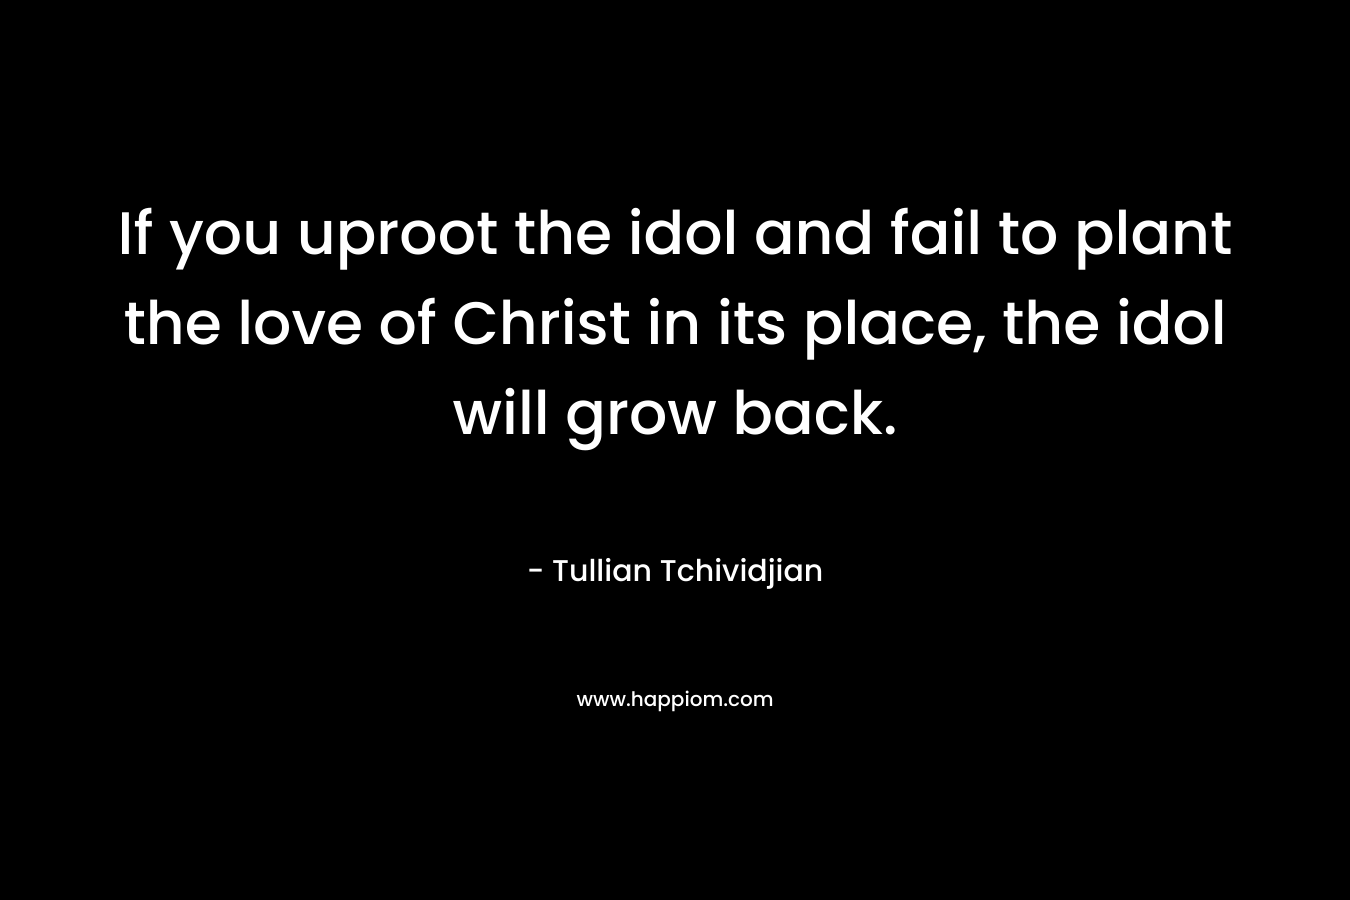 If you uproot the idol and fail to plant the love of Christ in its place, the idol will grow back.